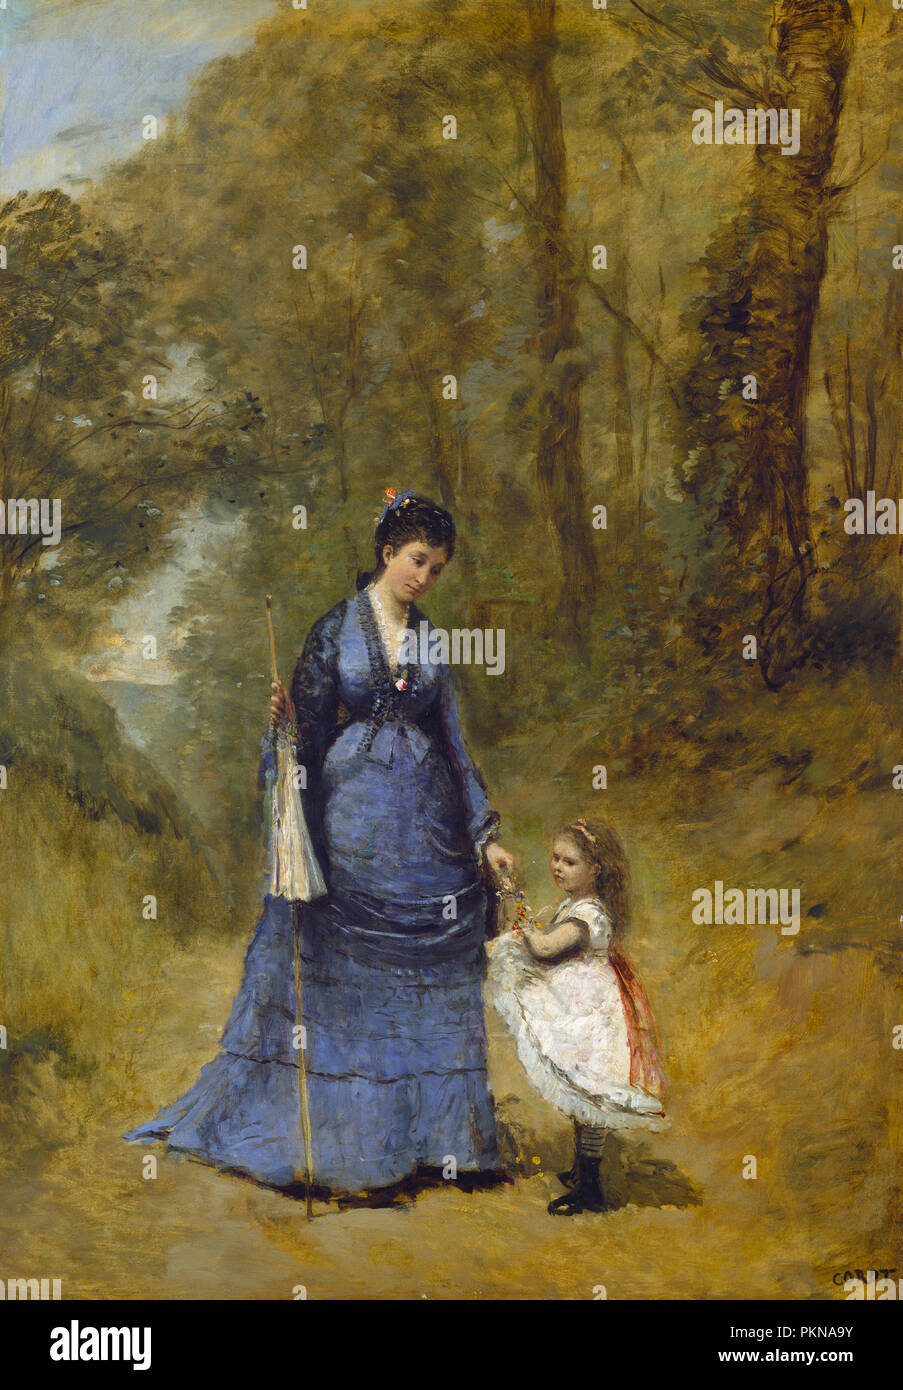 Madame Stumpf and Her Daughter. Dated: 1872. Dimensions: overall: 105 x 74 cm (41 5/16 x 29 1/8 in.)  framed: 128.3 x 101.9 x 7.6 cm (50 1/2 x 40 1/8 x 3 in.). Medium: oil on canvas. Museum: National Gallery of Art, Washington DC. Author: Corot, Jean-Baptiste-Camille. Camille Corot. Stock Photo